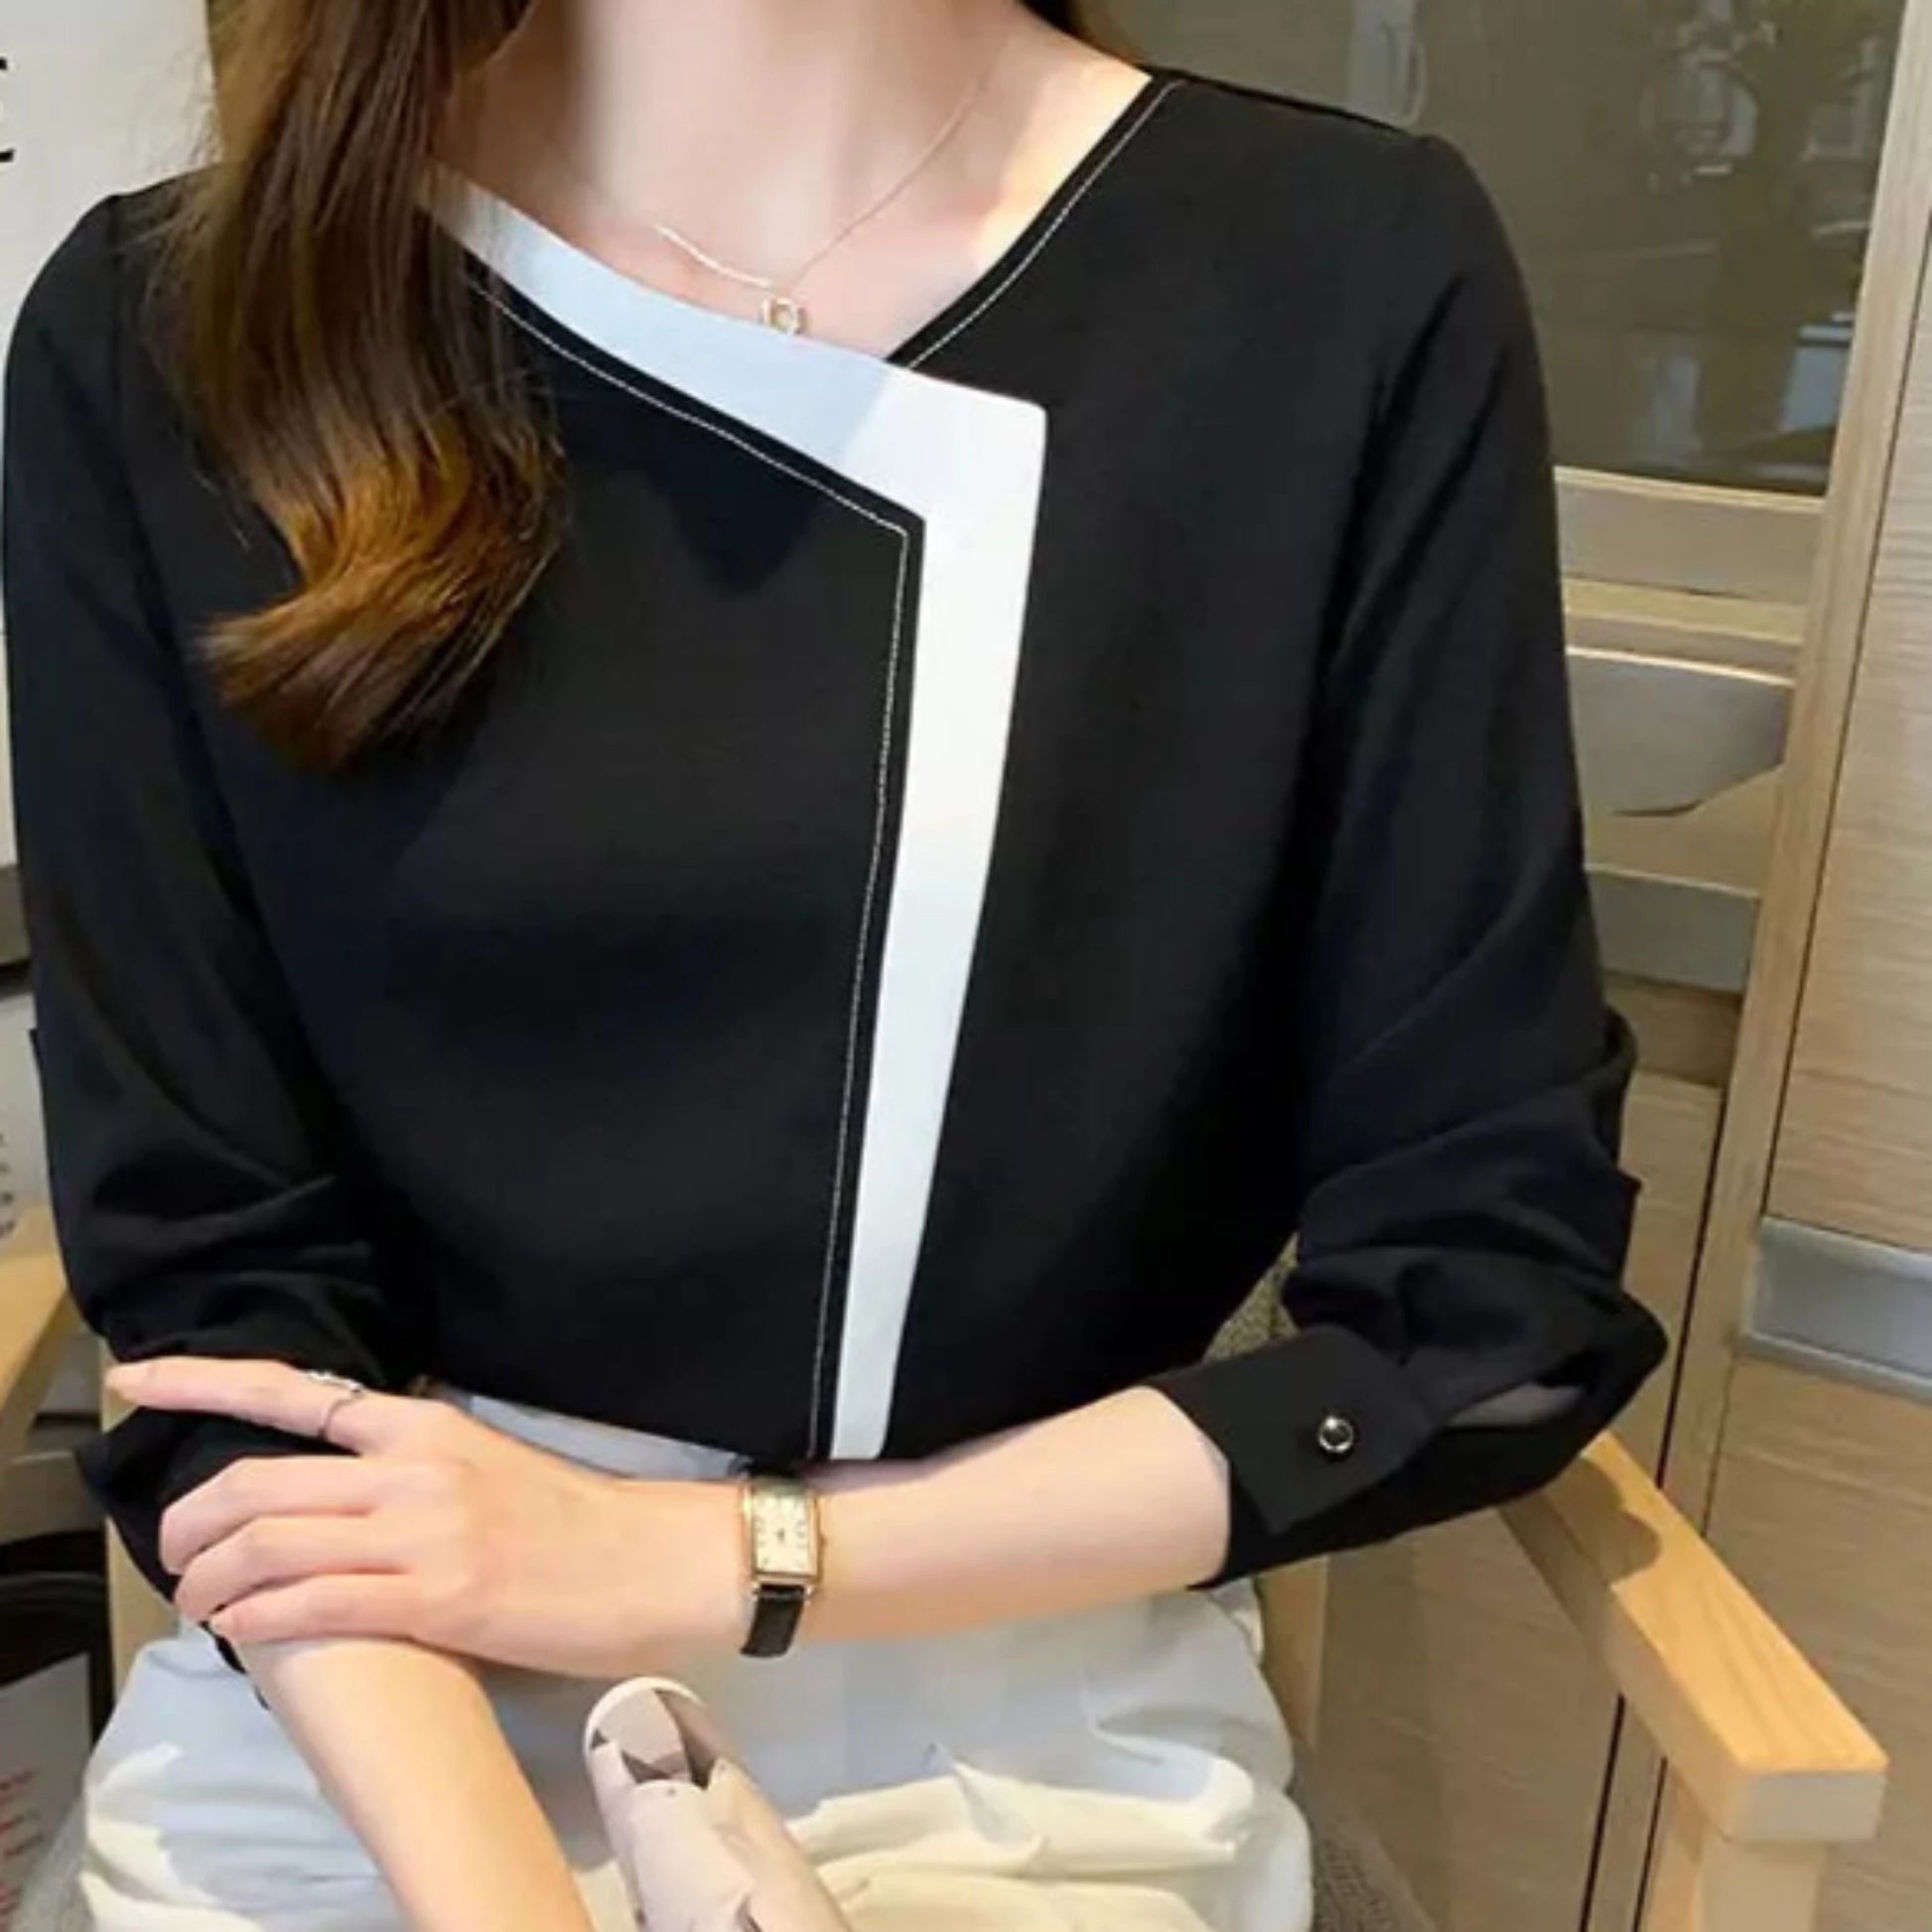 Best Elegant Casual Women's Bold-Long sleeve chiffon blouse - Try Modest Limited 